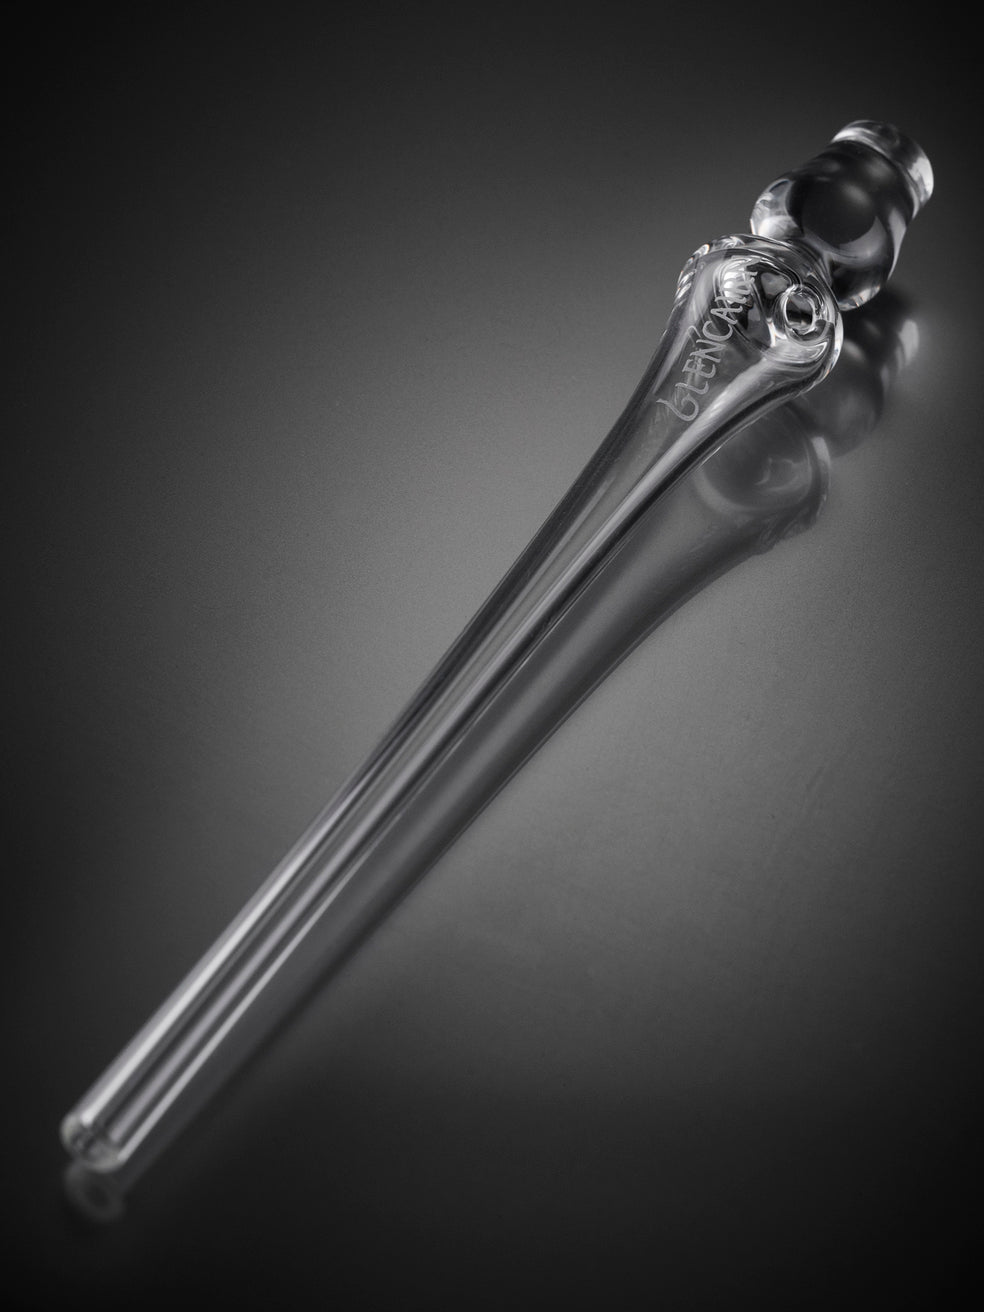 The Glencairn Pipette is designed to add the exact amount of water to your whisky.